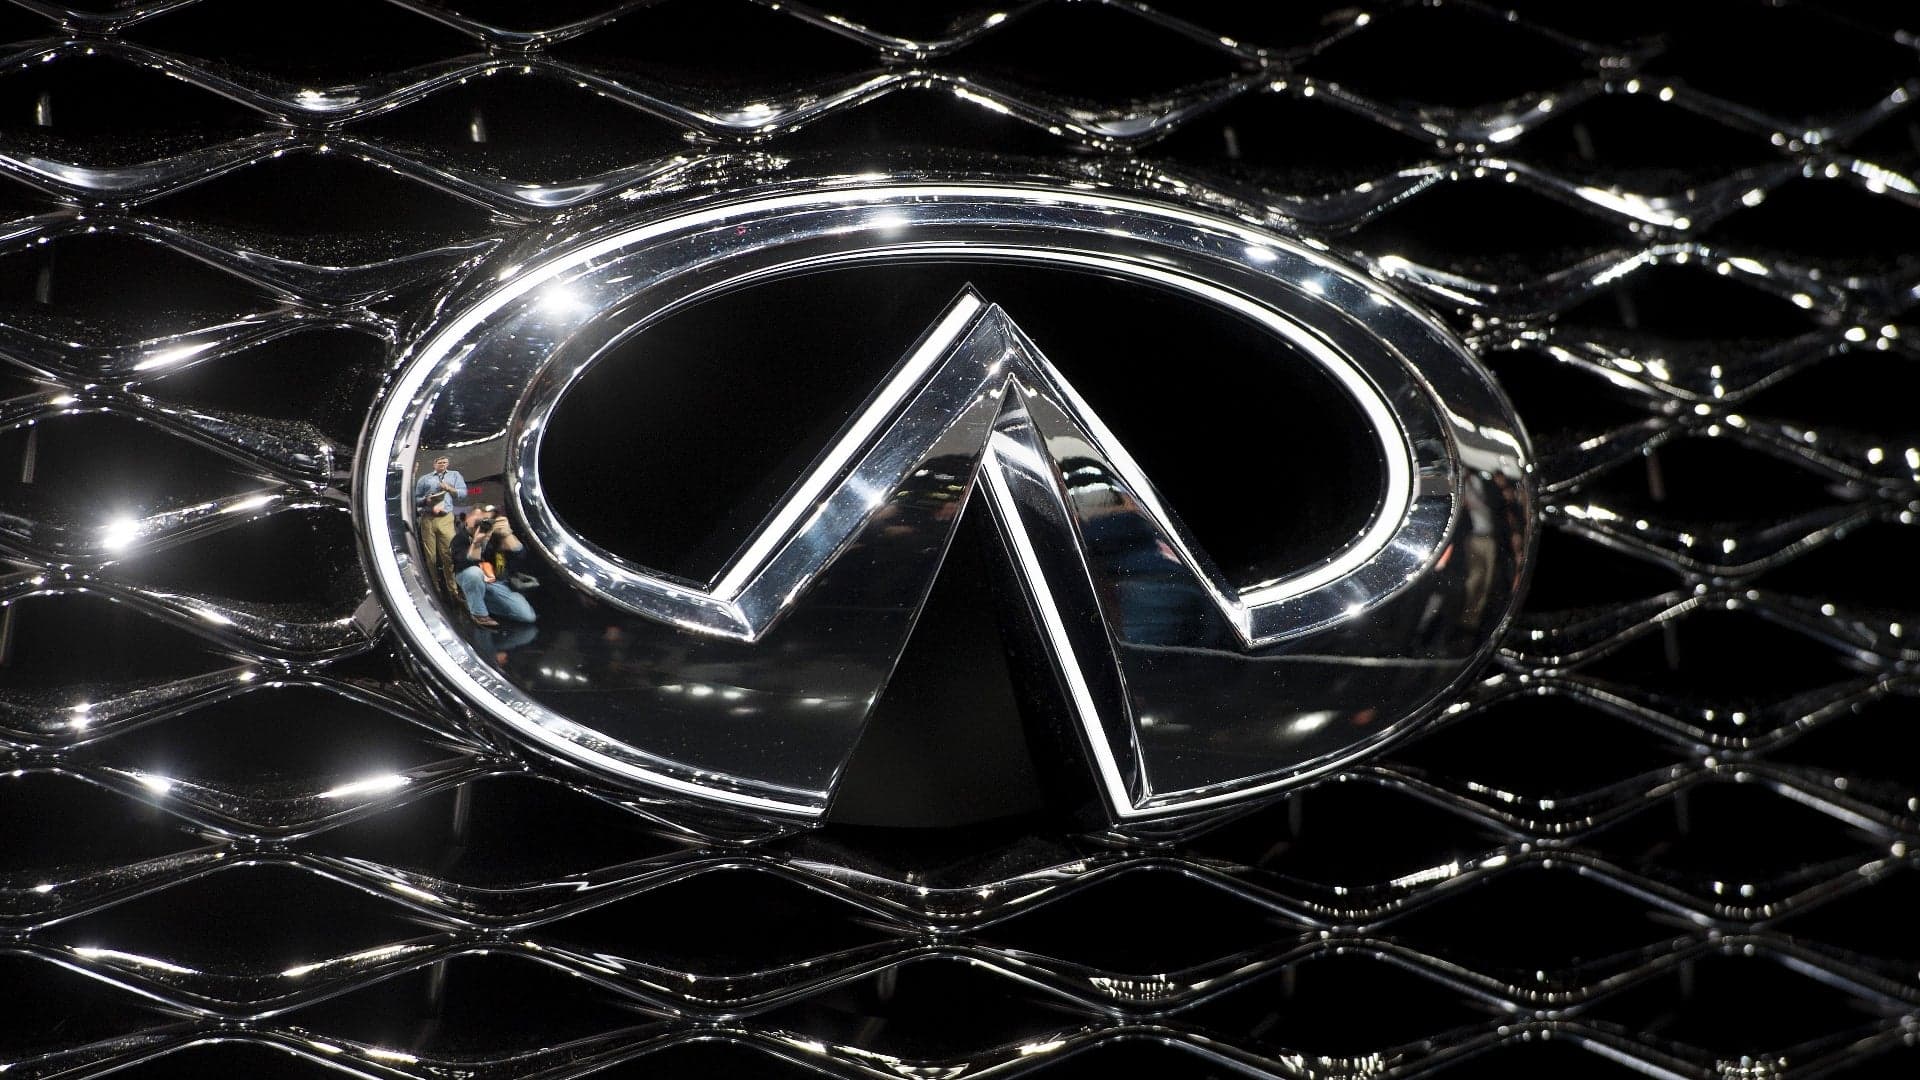 Infiniti Gives up on Western Europe, Will Leave in Early 2020